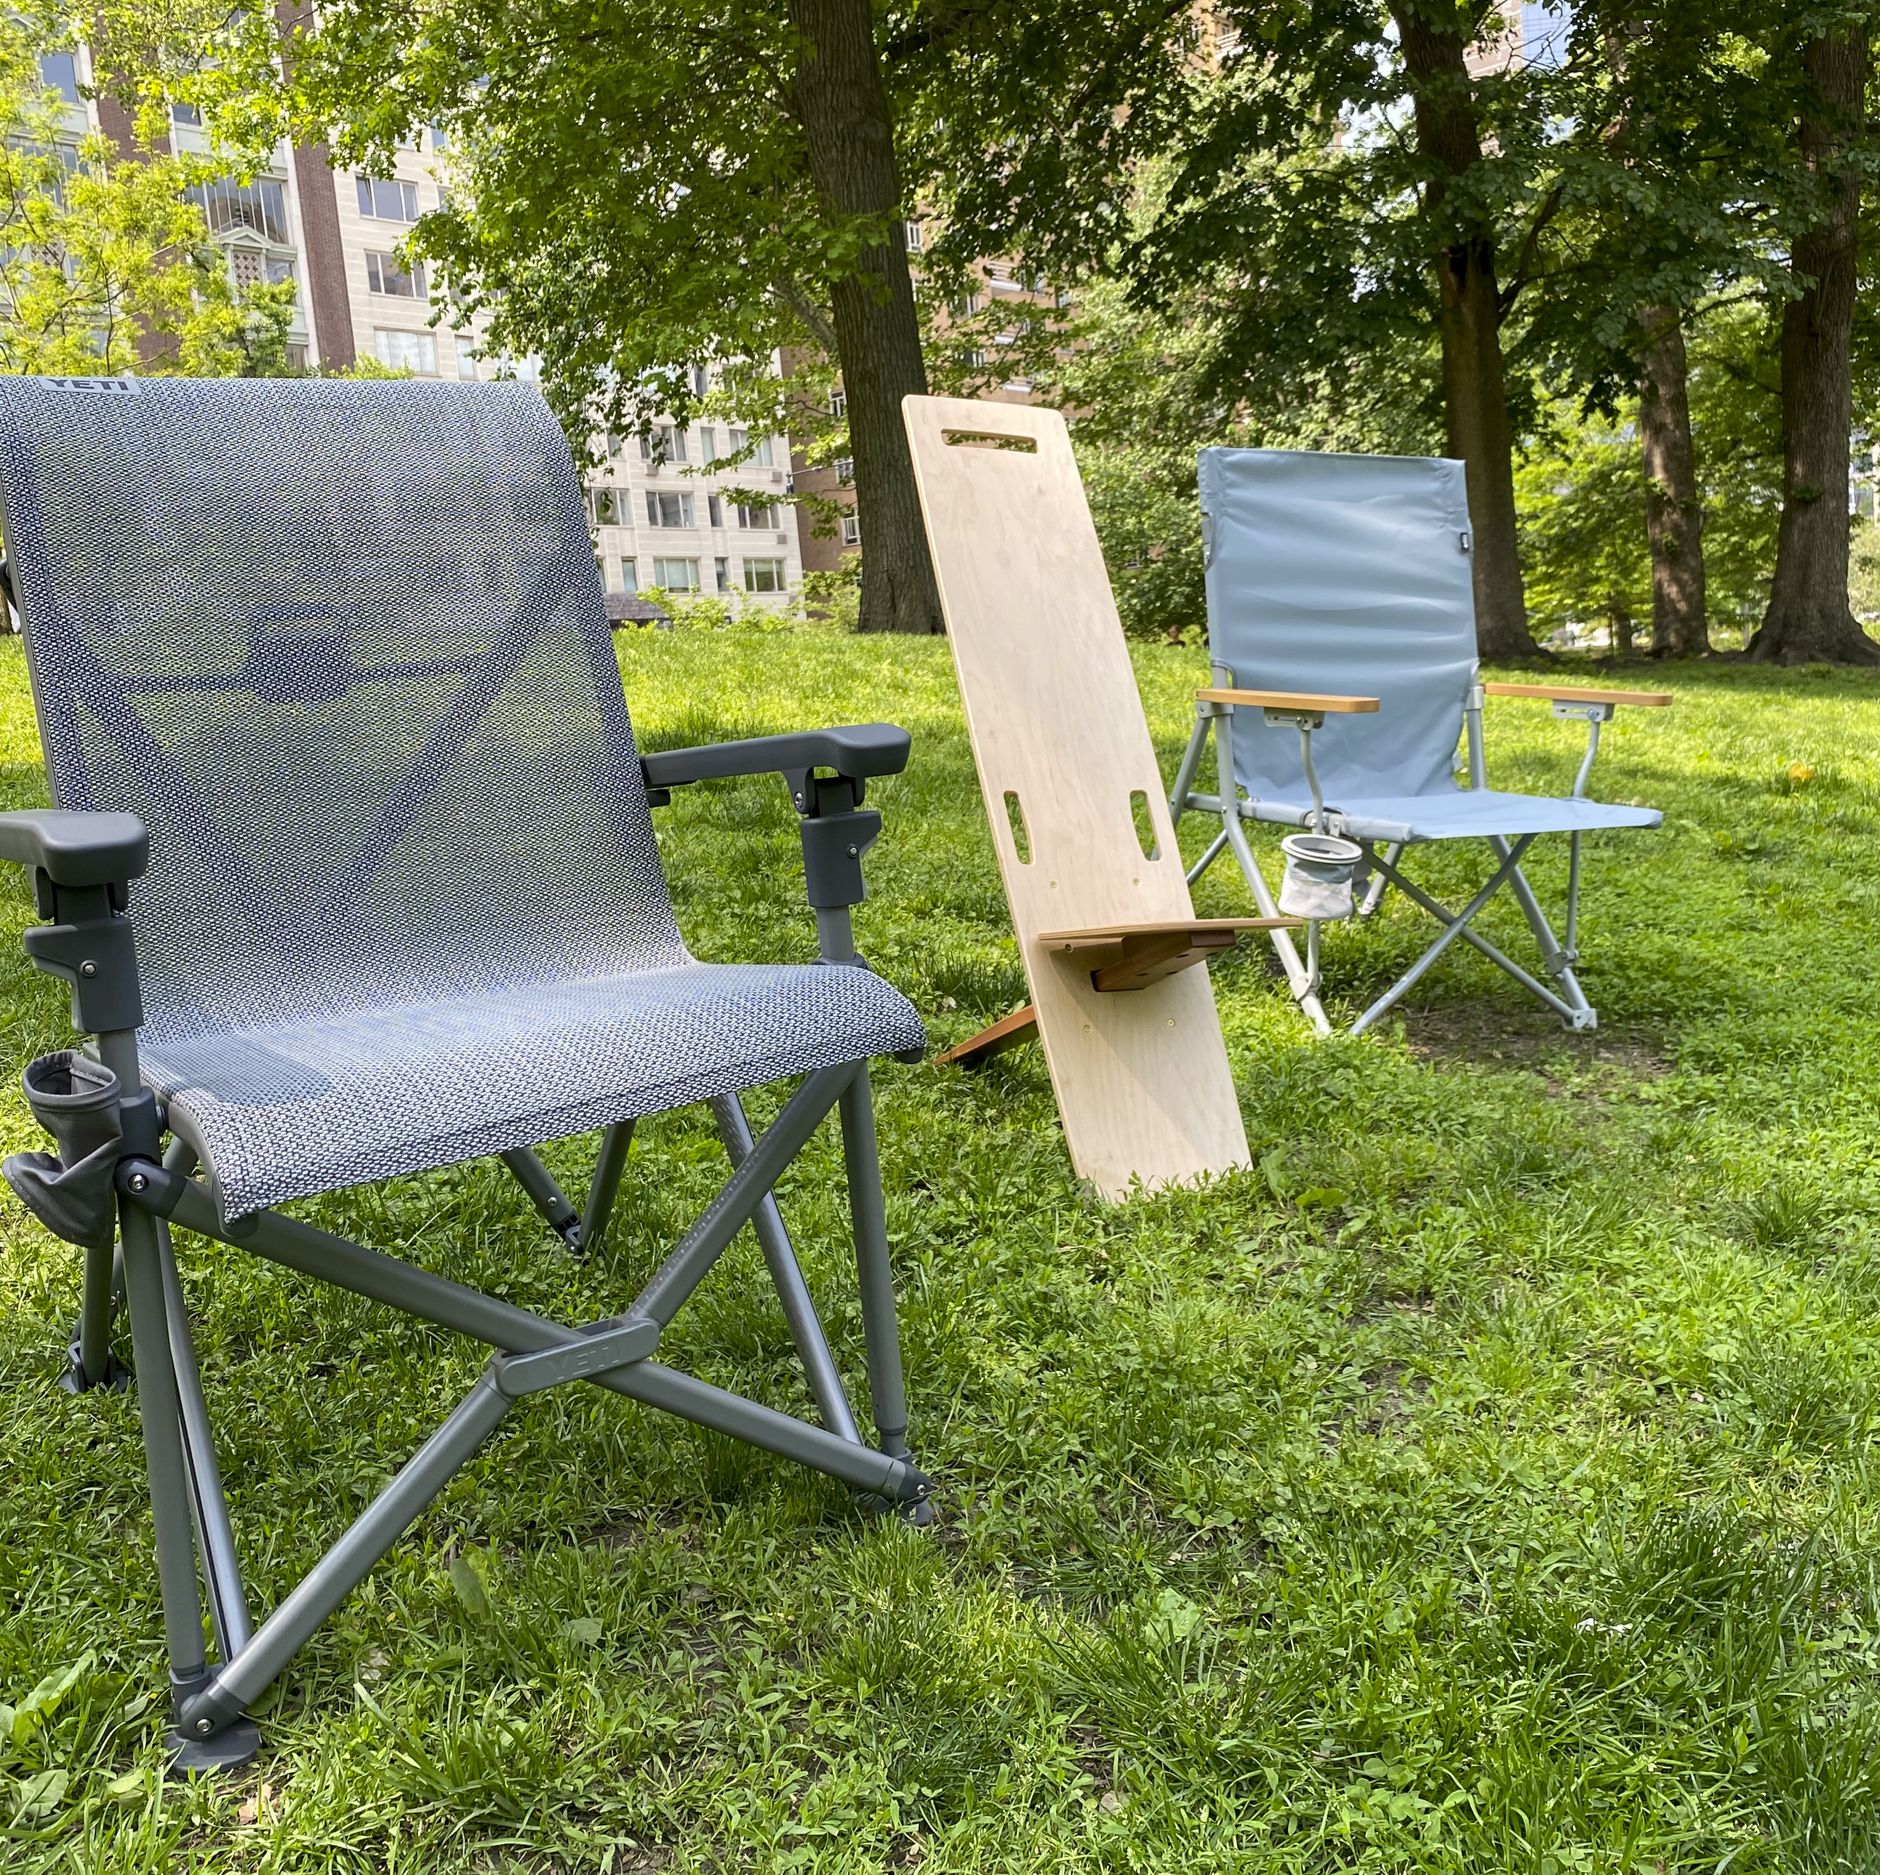 Sit By the Campfire in Comfort With These Tried-and-True Camp Chairs